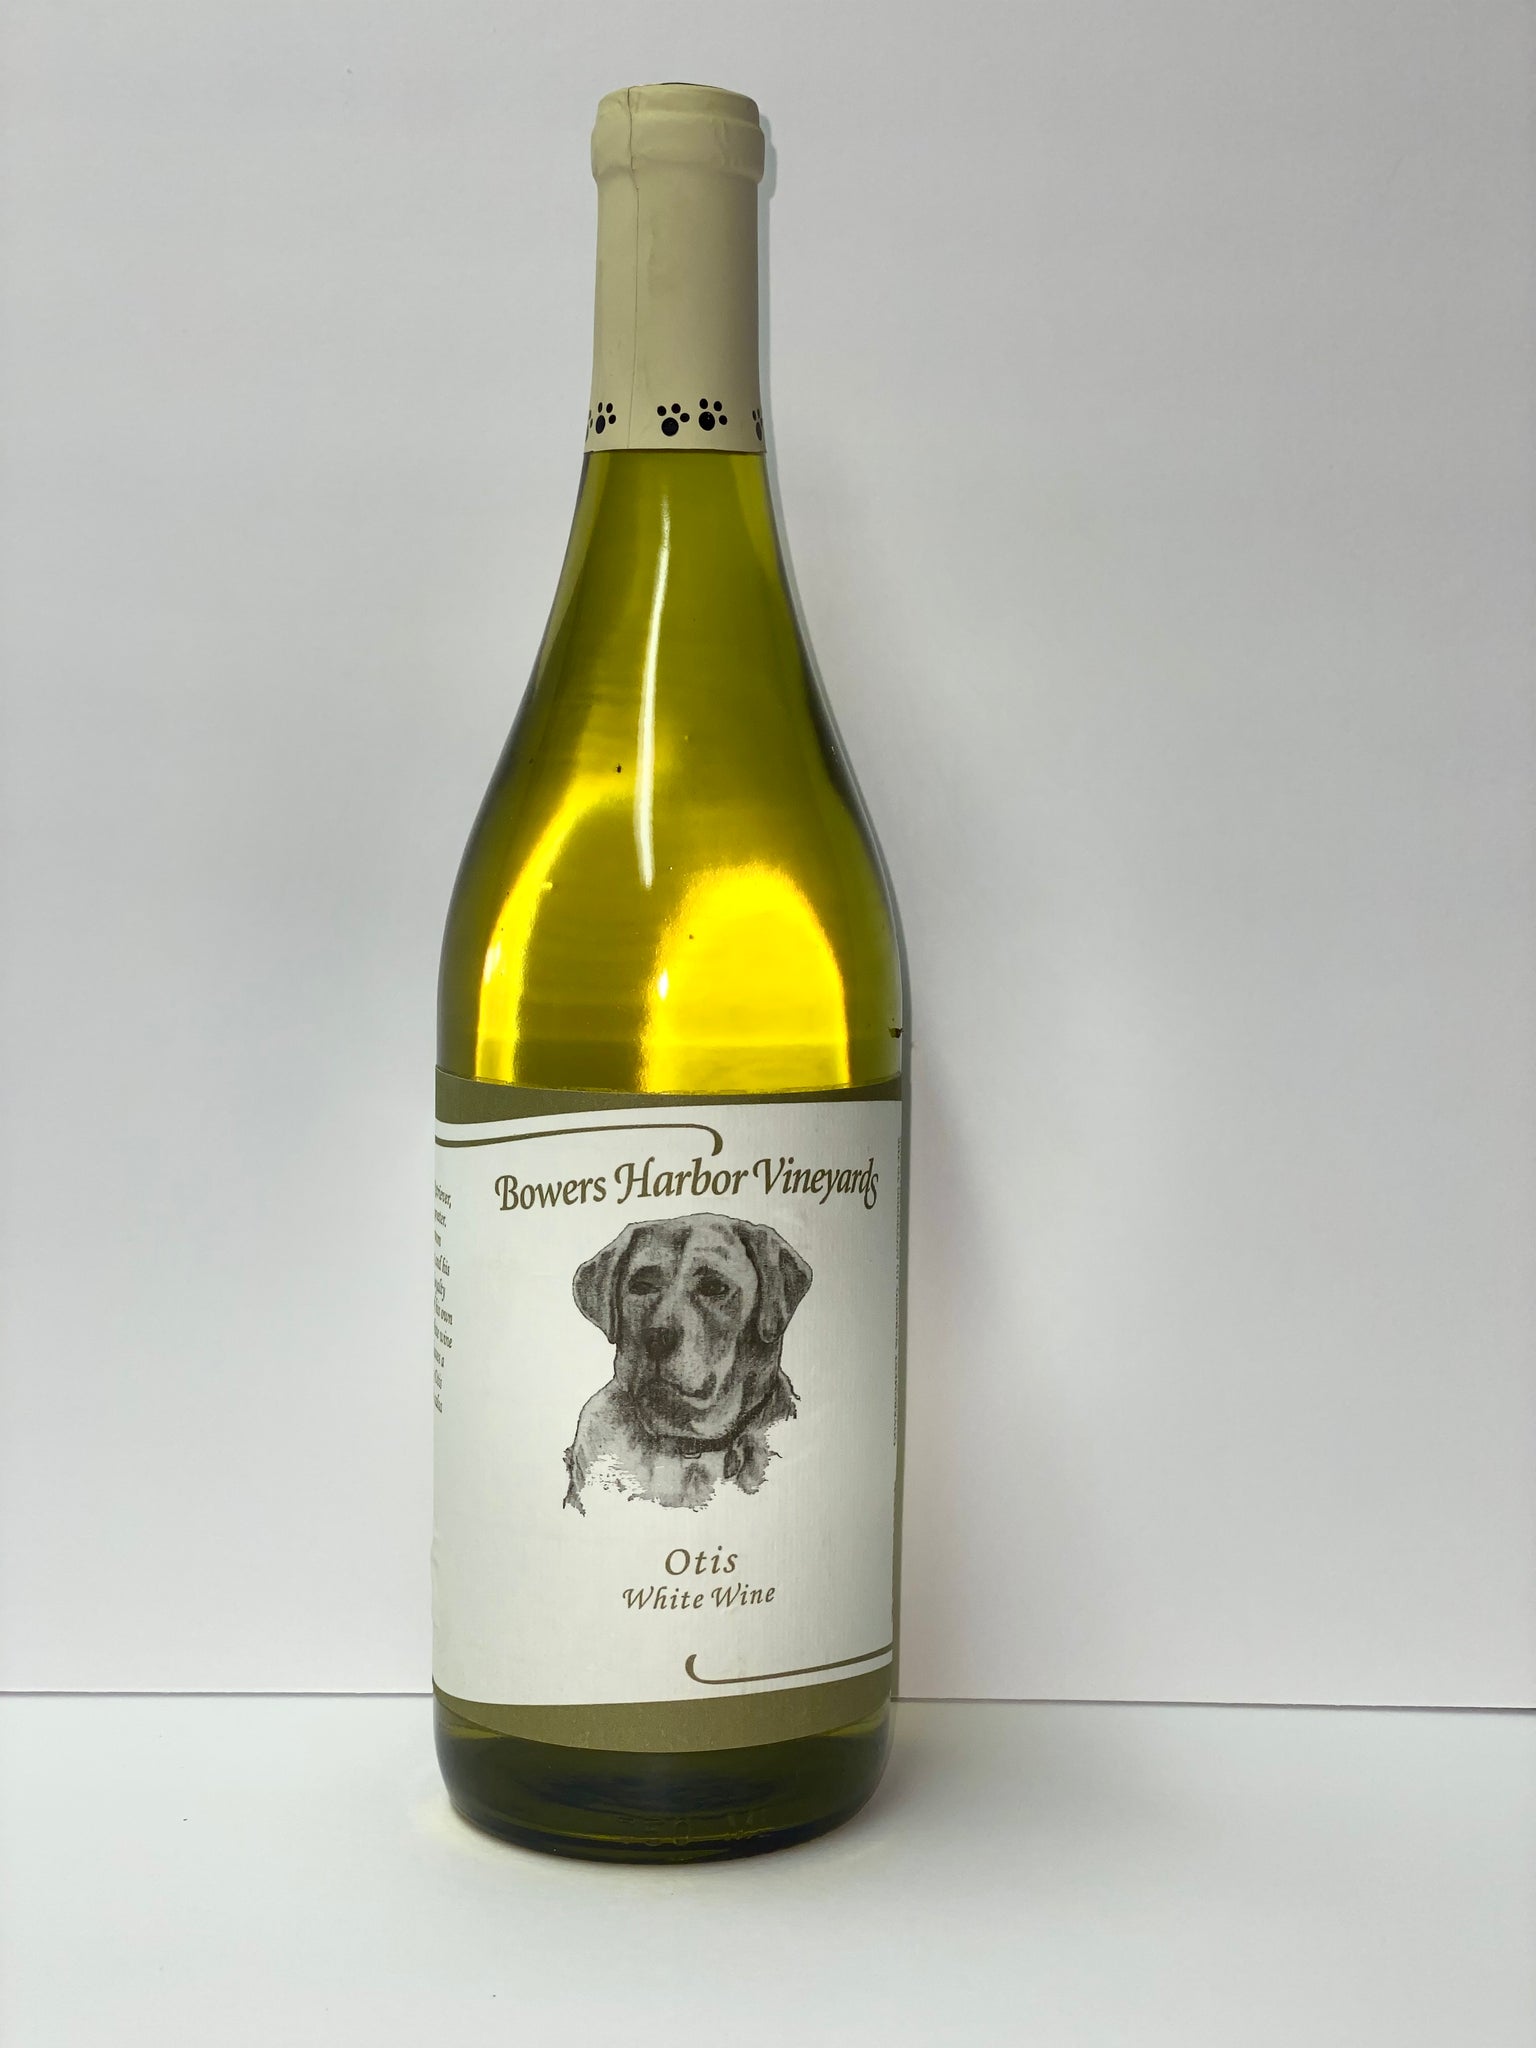 Otis White Wine - Delivery only. Must be present for age verification.